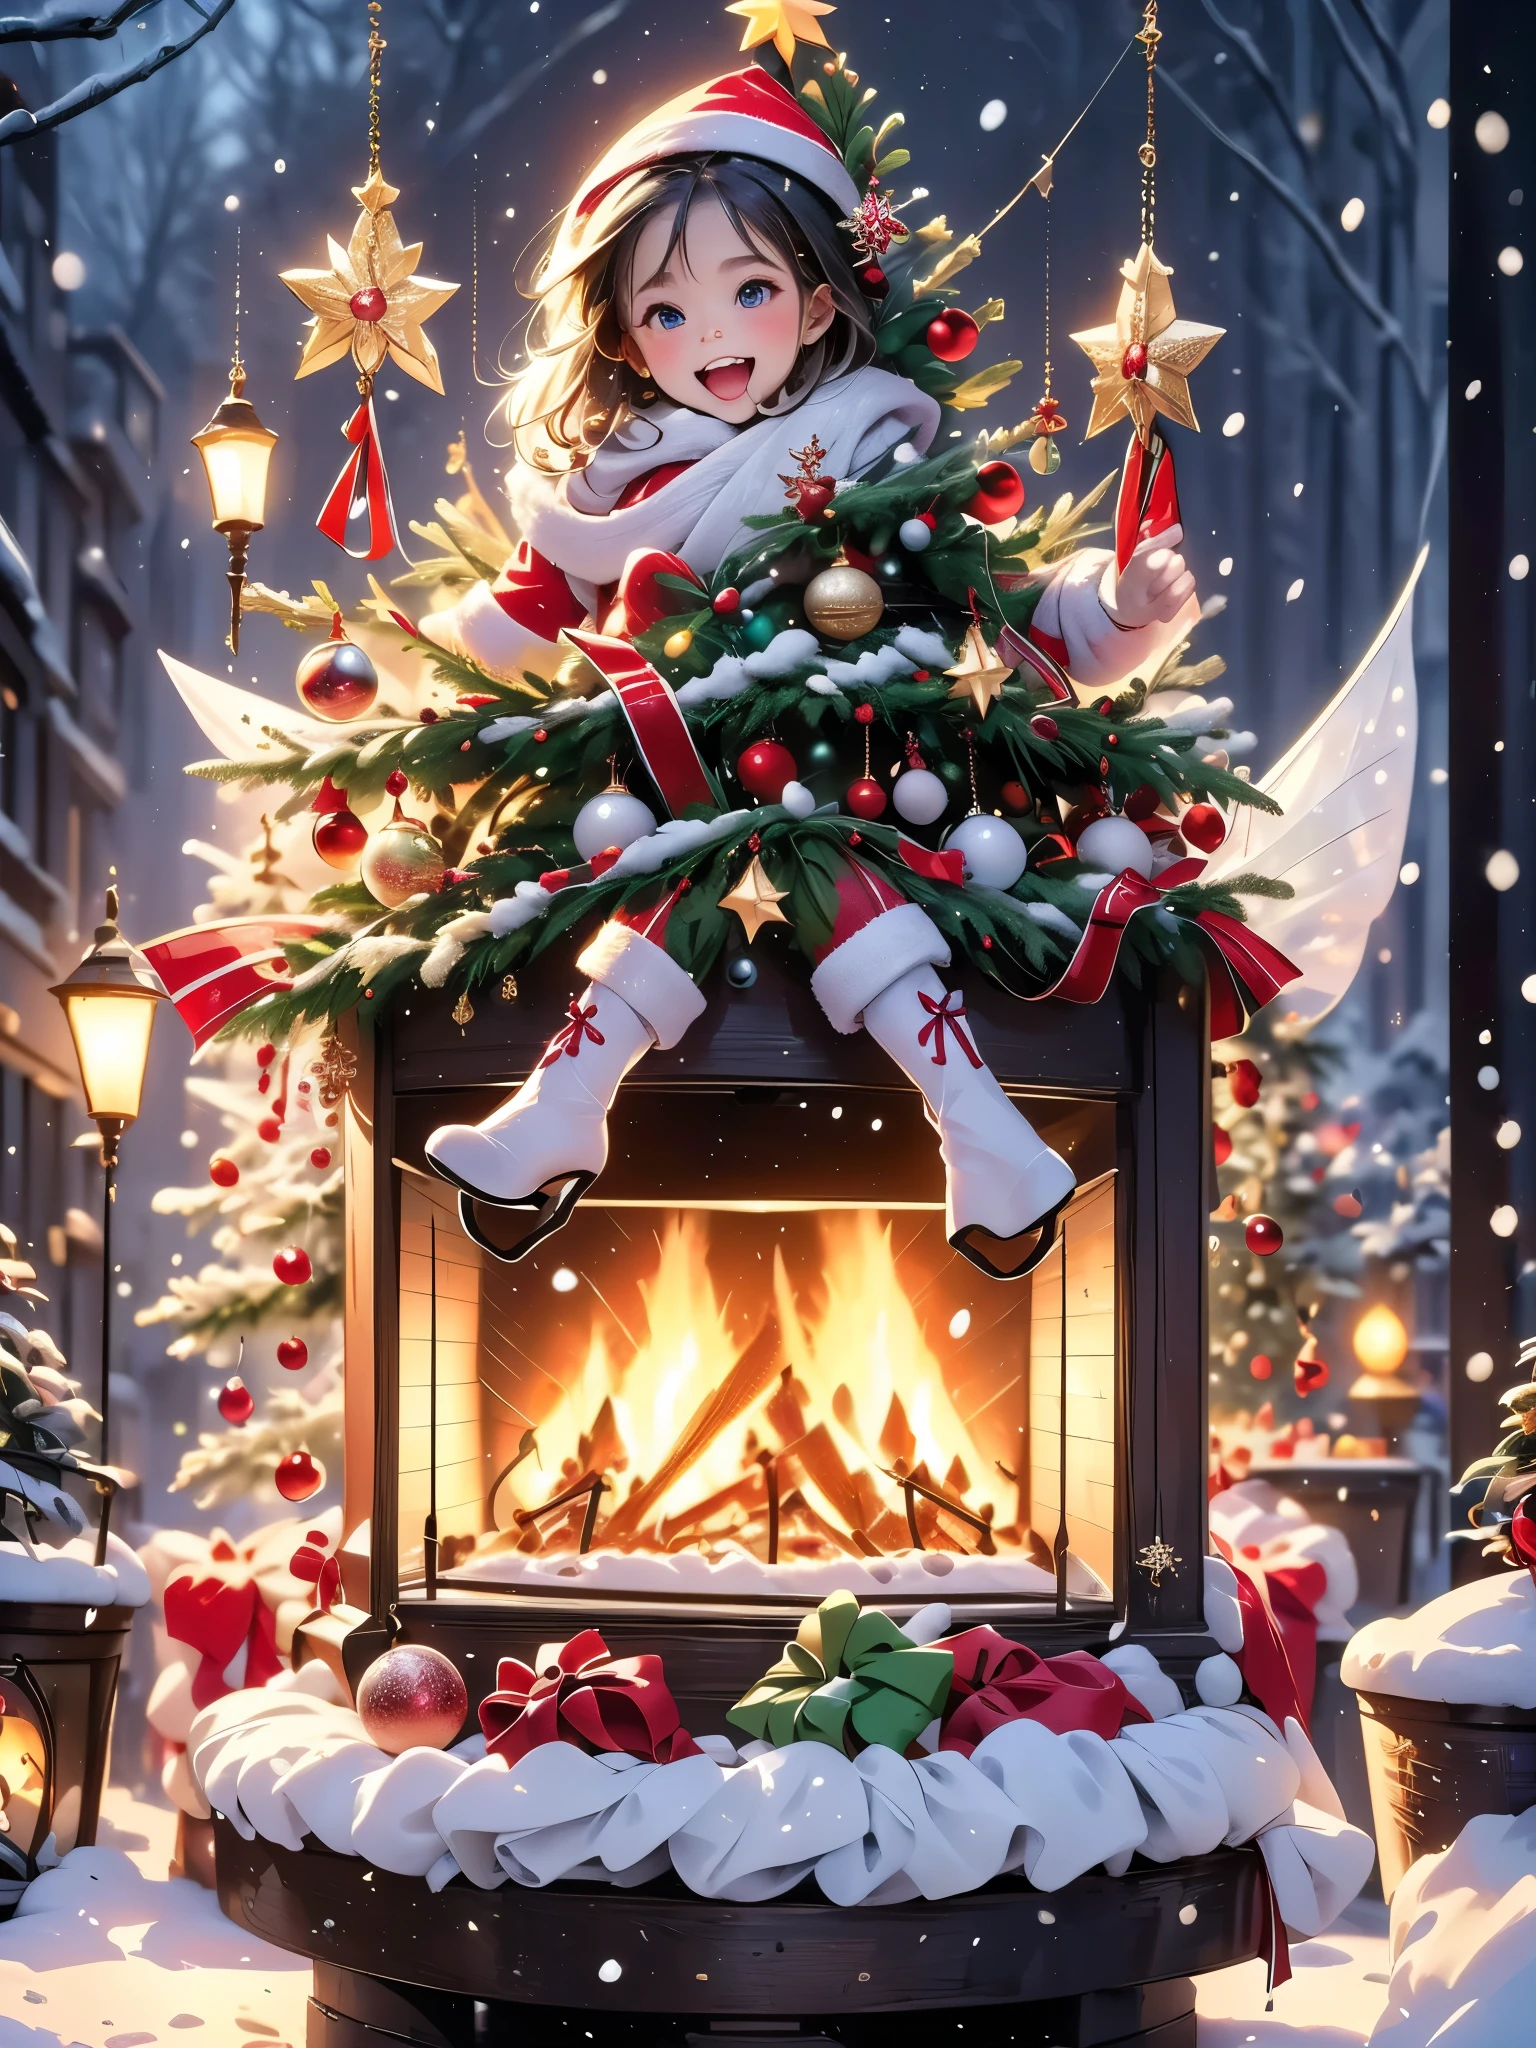 (best quality,4k,8k,highres,masterpiece:1.2),ultra-detailed,realistic,professional,vivid colors,bokeh,A 5-year-old girl opening a Christmas gift,studio lighting,painting texture,magic atmosphere,bright colors,happiness,detailed facial expression,joyful eyes,cute smile,excitement,sparkling lights,elegant wrapping paper,beautifully decorated Christmas tree,colorful ornaments,soft glowing candles,fluffy snow outside,warm fireplace,happy family celebration,cozy living room,magical Christmas Eve,enchanting spirit of Christmas,wonder and anticipation,festive atmosphere,decorative ribbons and bows,flying golden stars,fairy lights,twinkling decorations,belief in Santa Claus,delightful surprise,innocent wonder,memorable moment,snowflakes falling quietly,Merry Christmas!